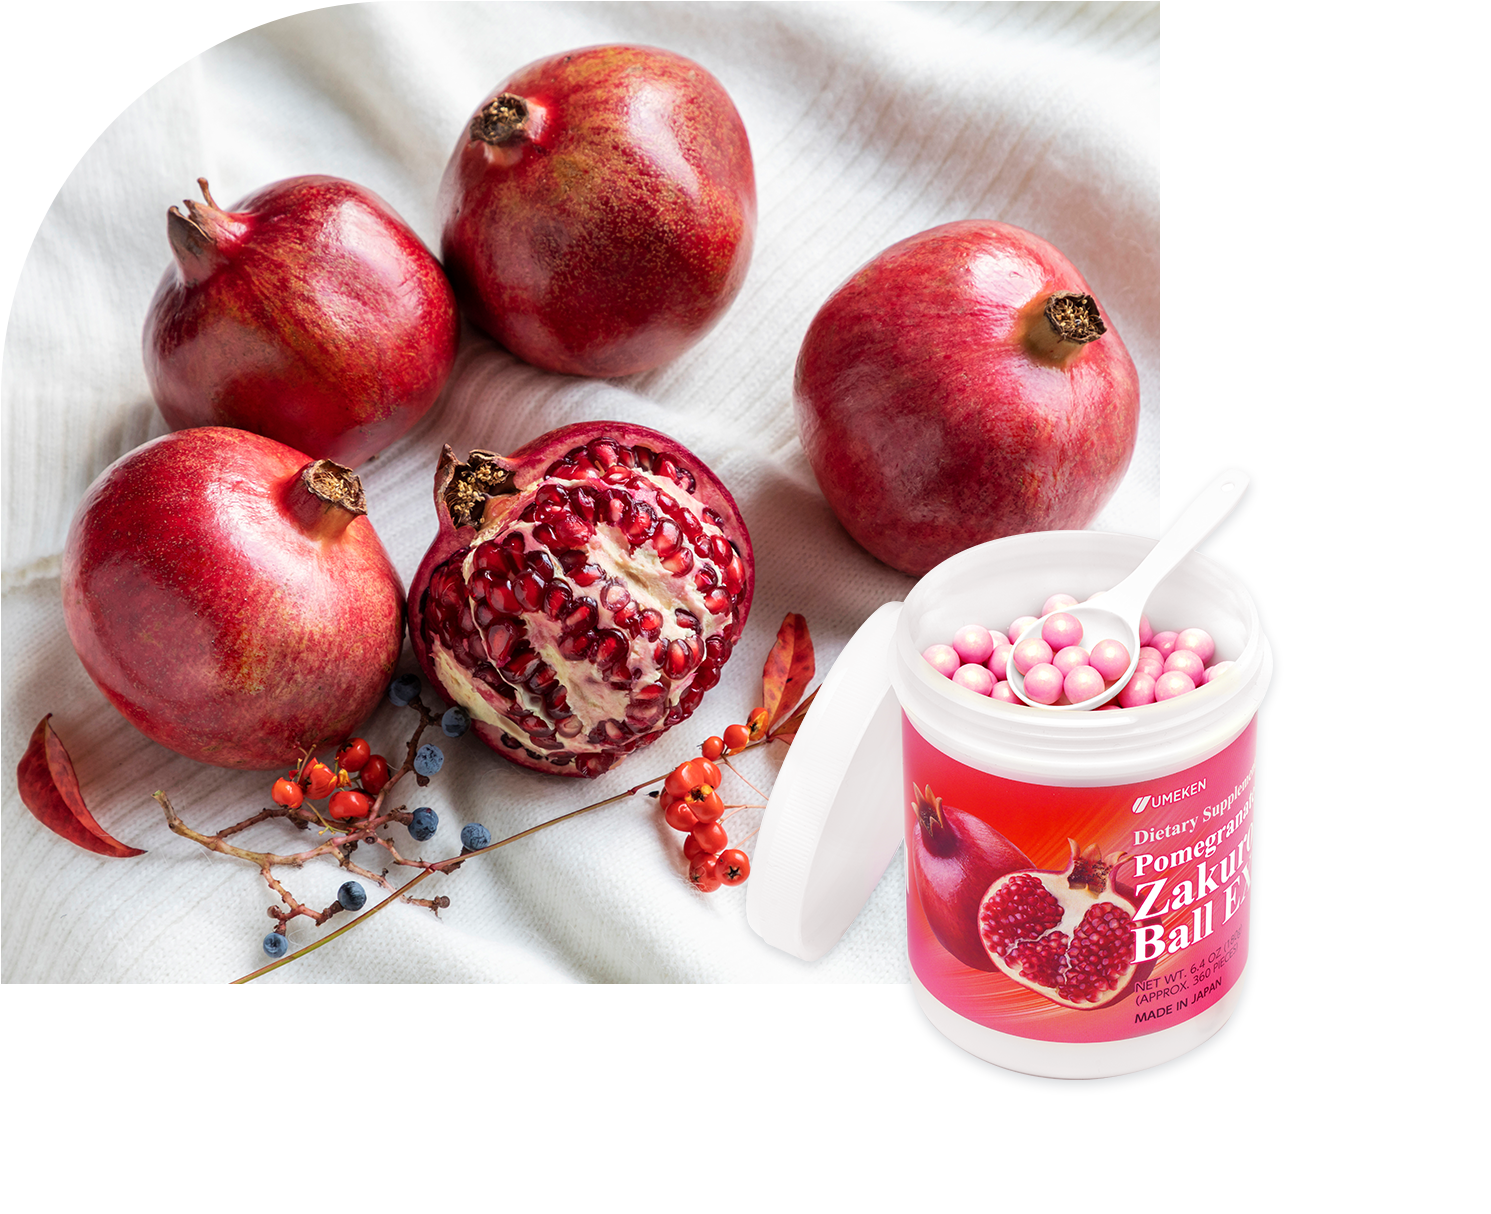 Umeken Pomegranate Ball EX contains pomegranate extract, melon placenta, lipoic acid, ceramide, and cranberry to form a superior health supplement for women.